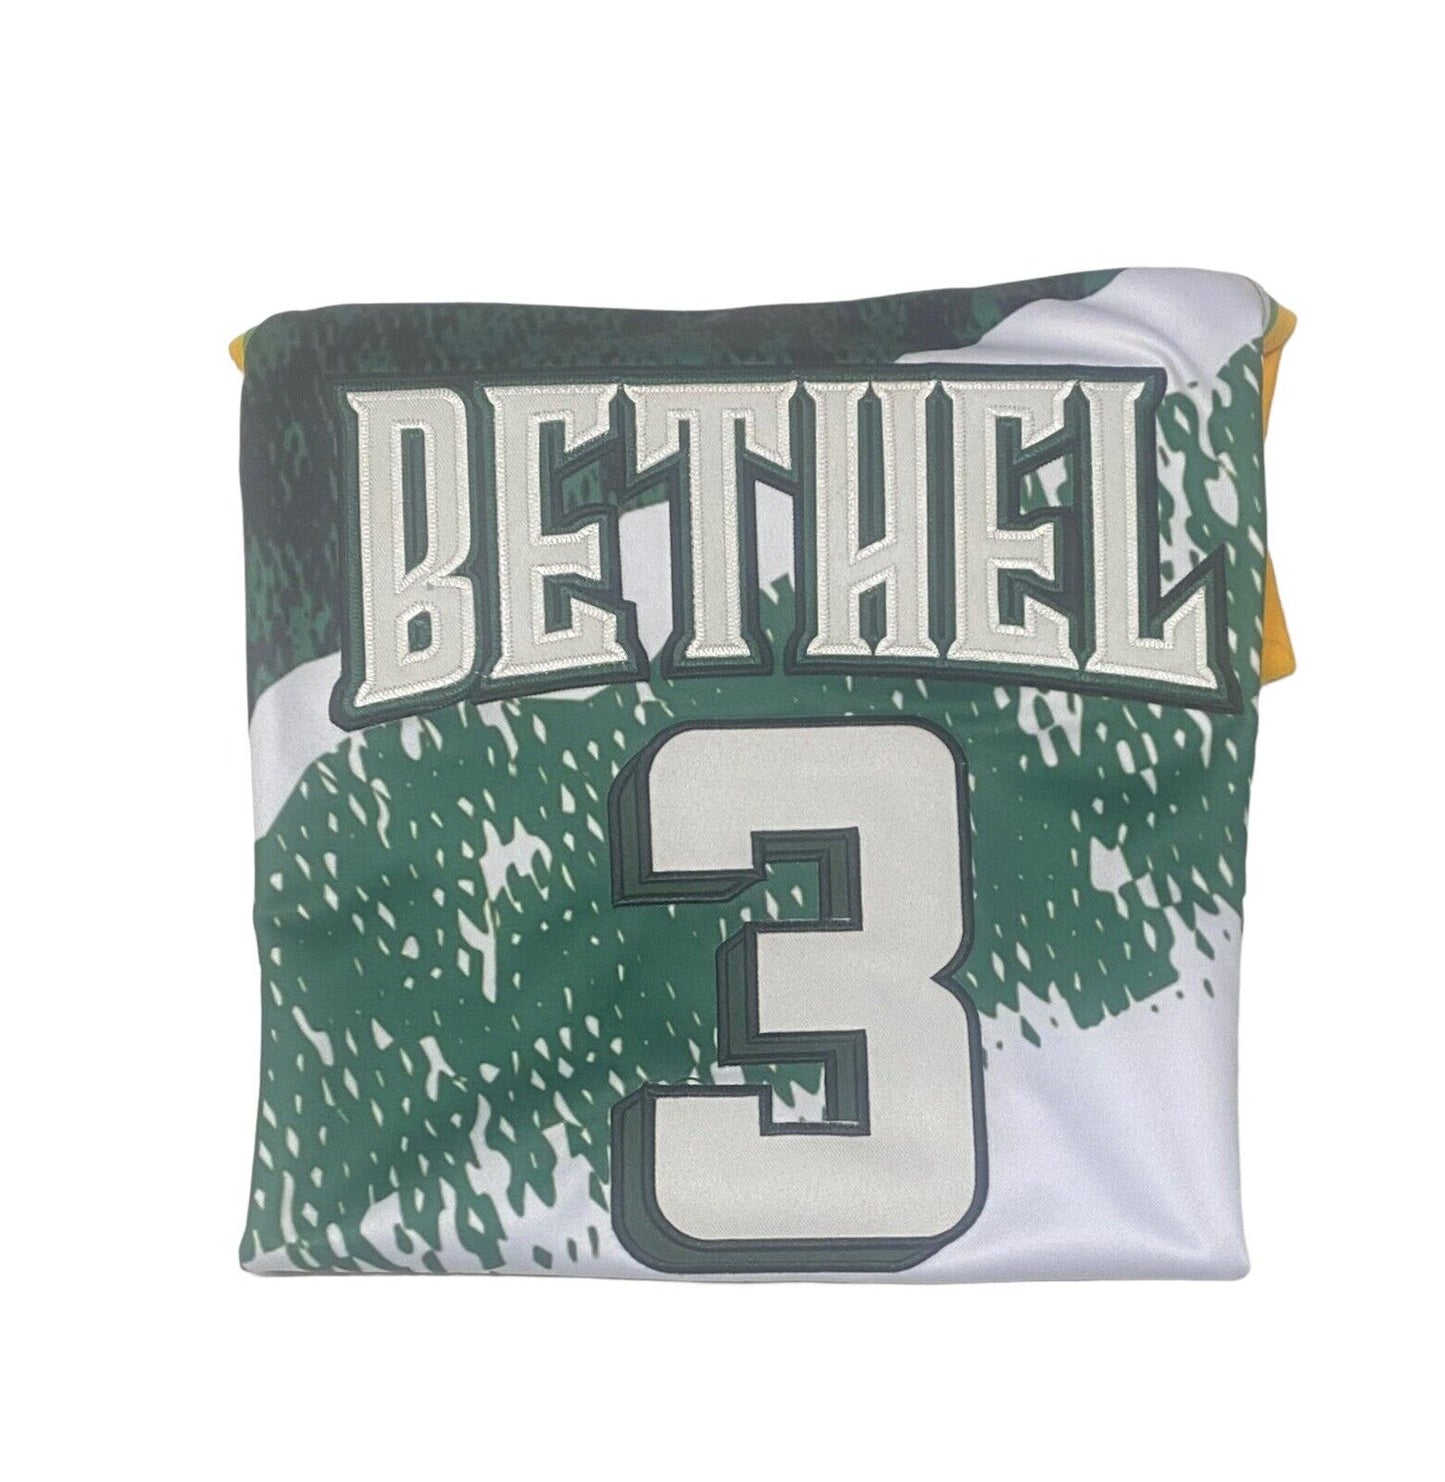 NEW AUTHENTIC Allen Iverson #3 Bethel HighSchool Throwback Basketball Jersey M